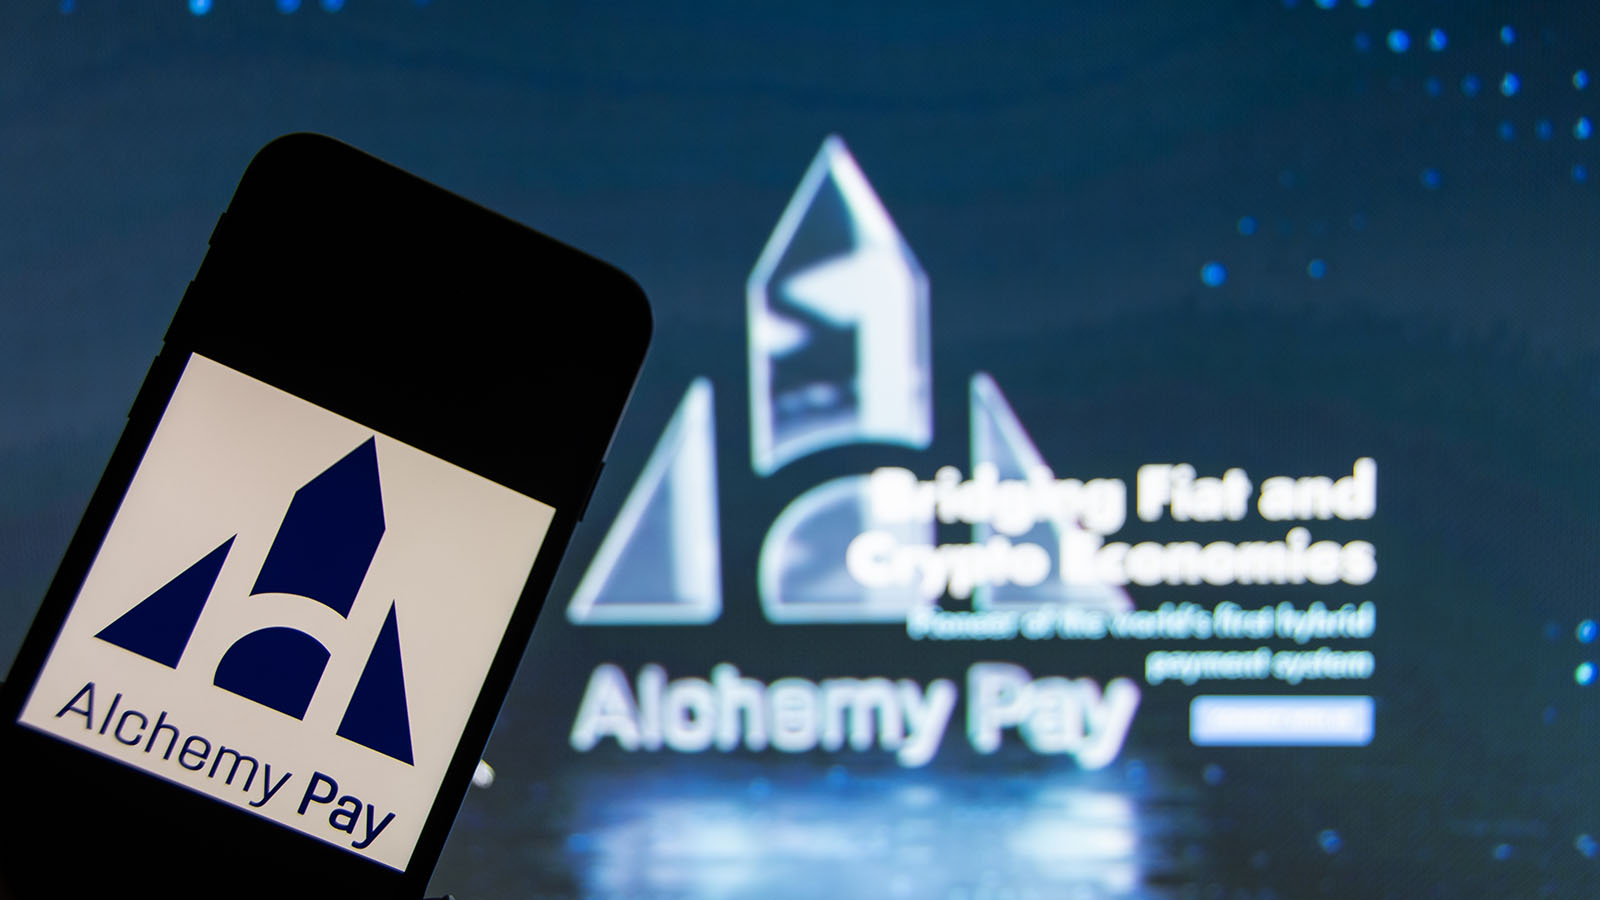 Alchemy Pay Price Predictions: What’s Next for the ACH Crypto?